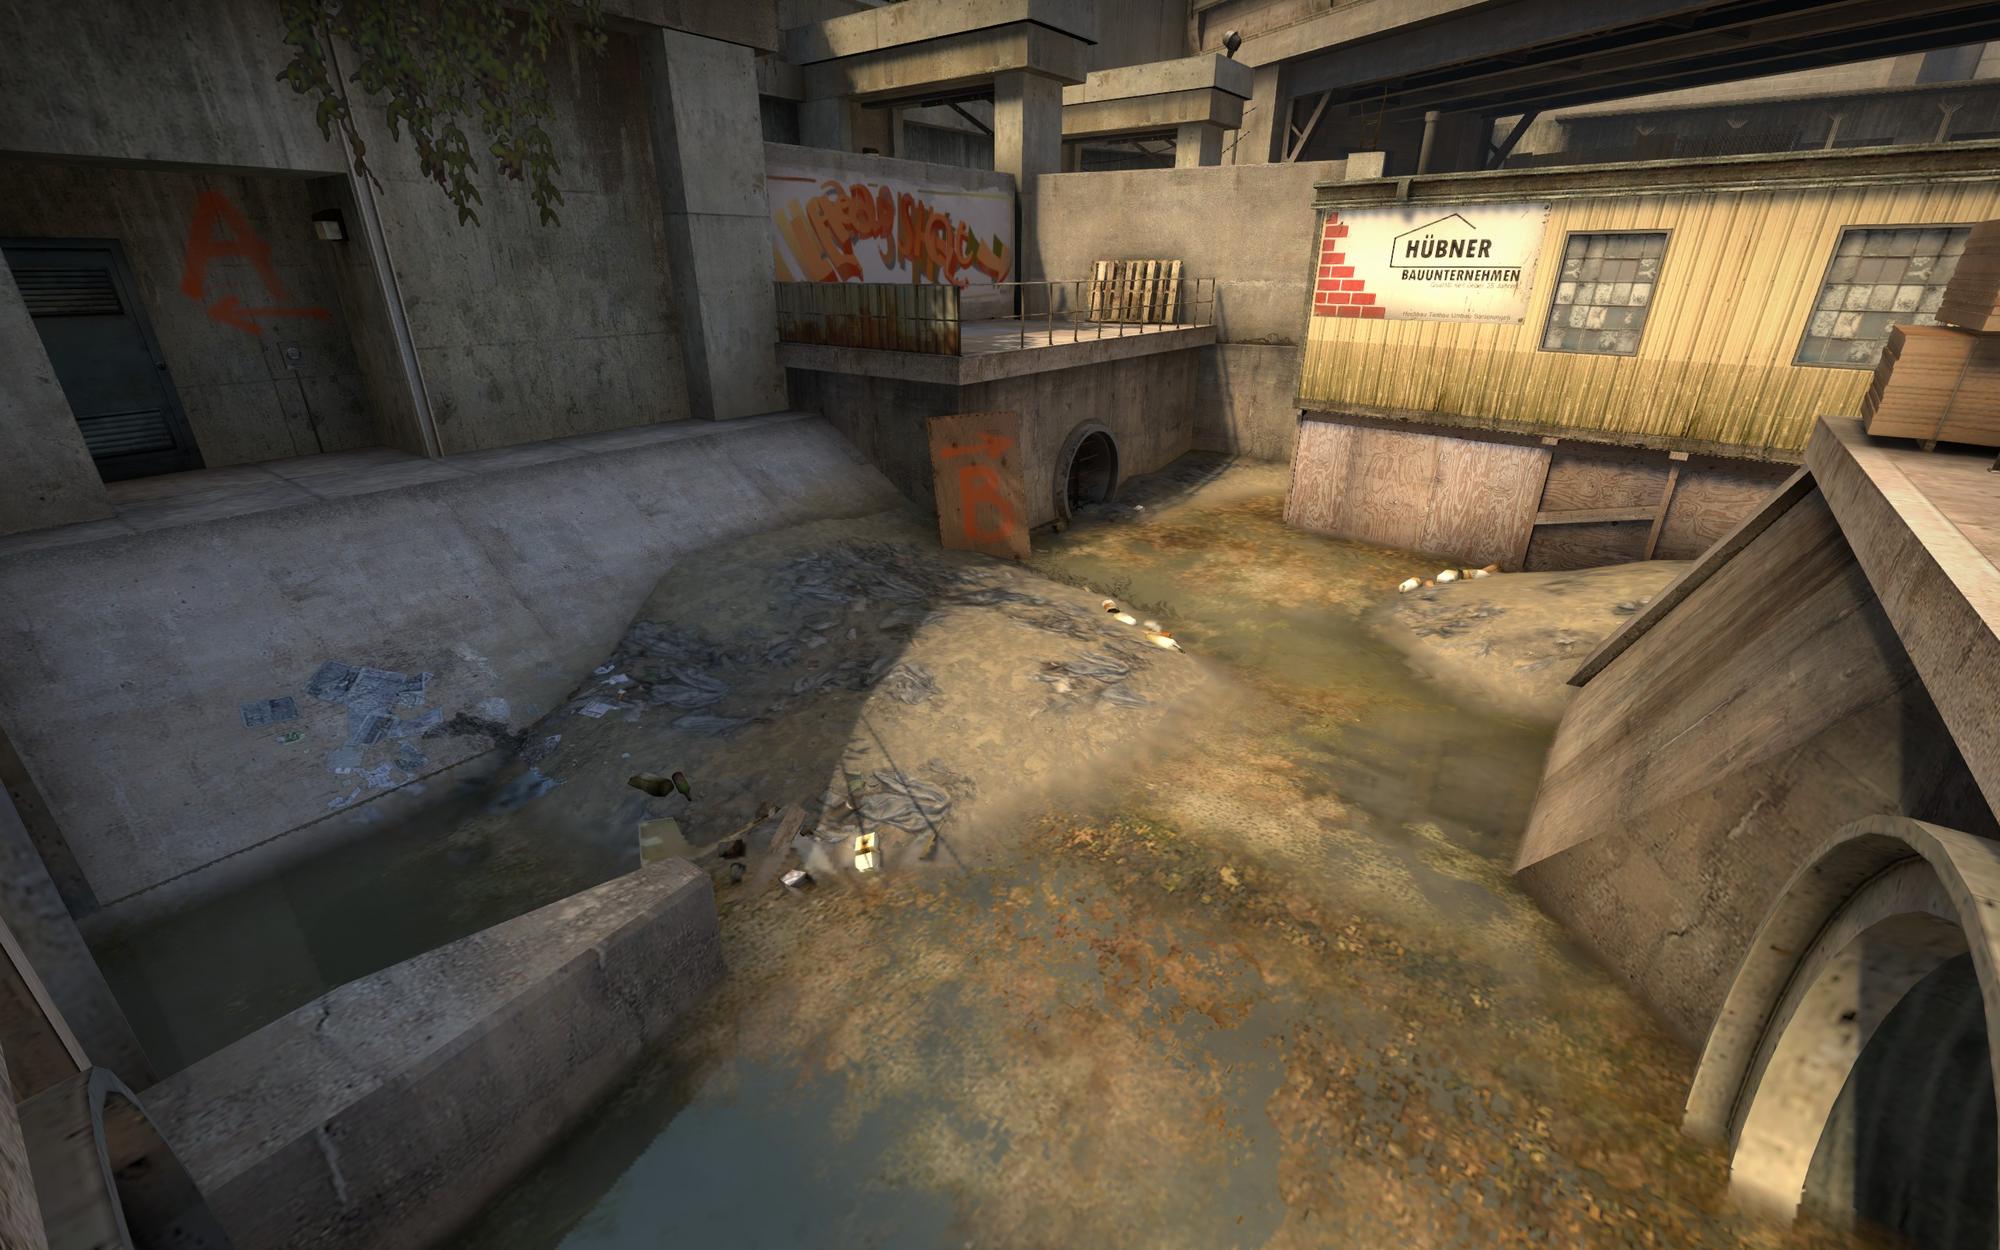 Counter-Strike: Global Offensive.